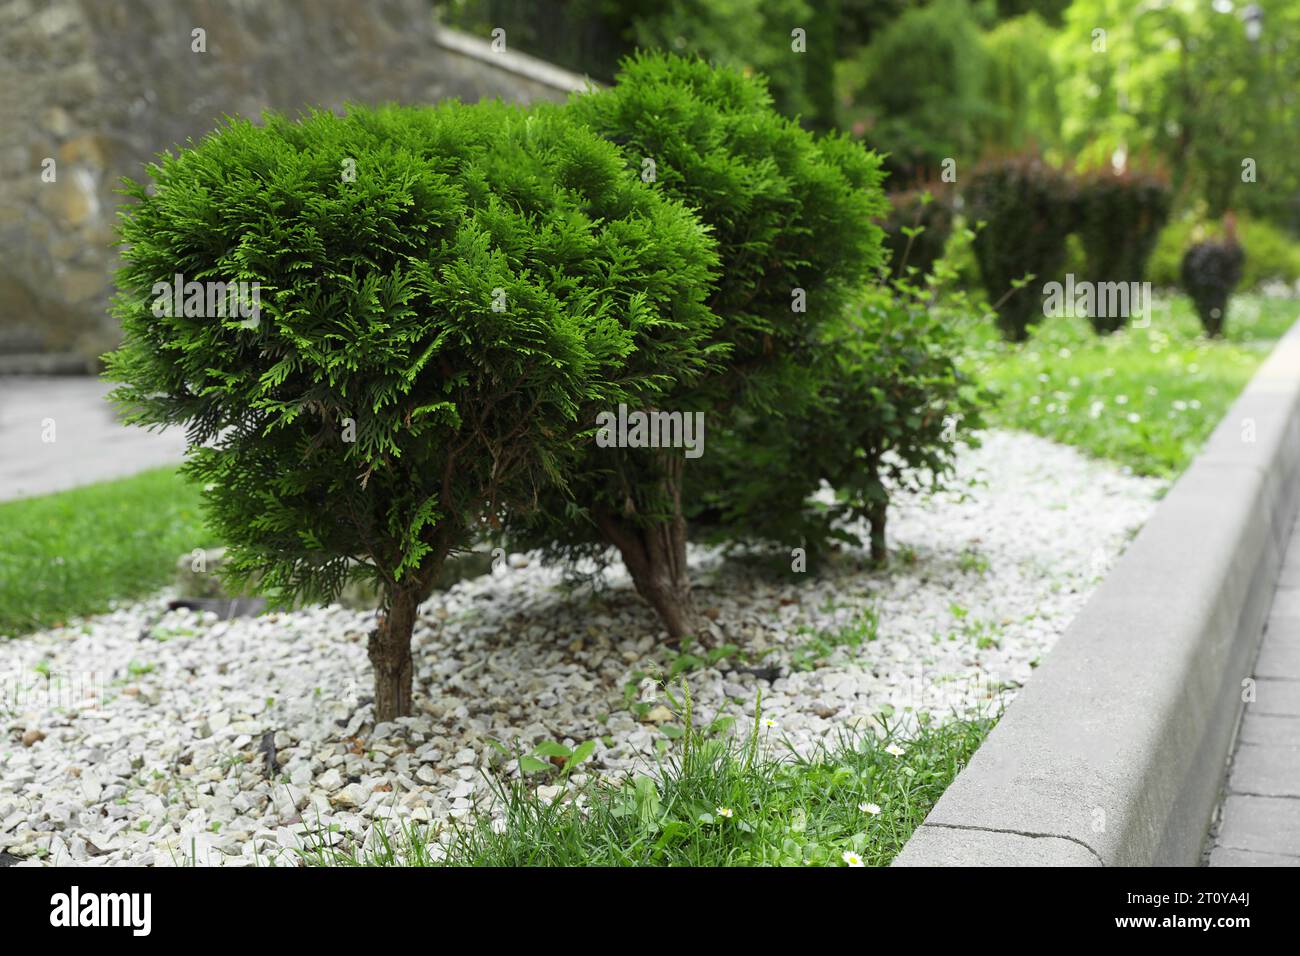 Beautiful thuja trees growing in park. Gardening and landscaping Stock Photo